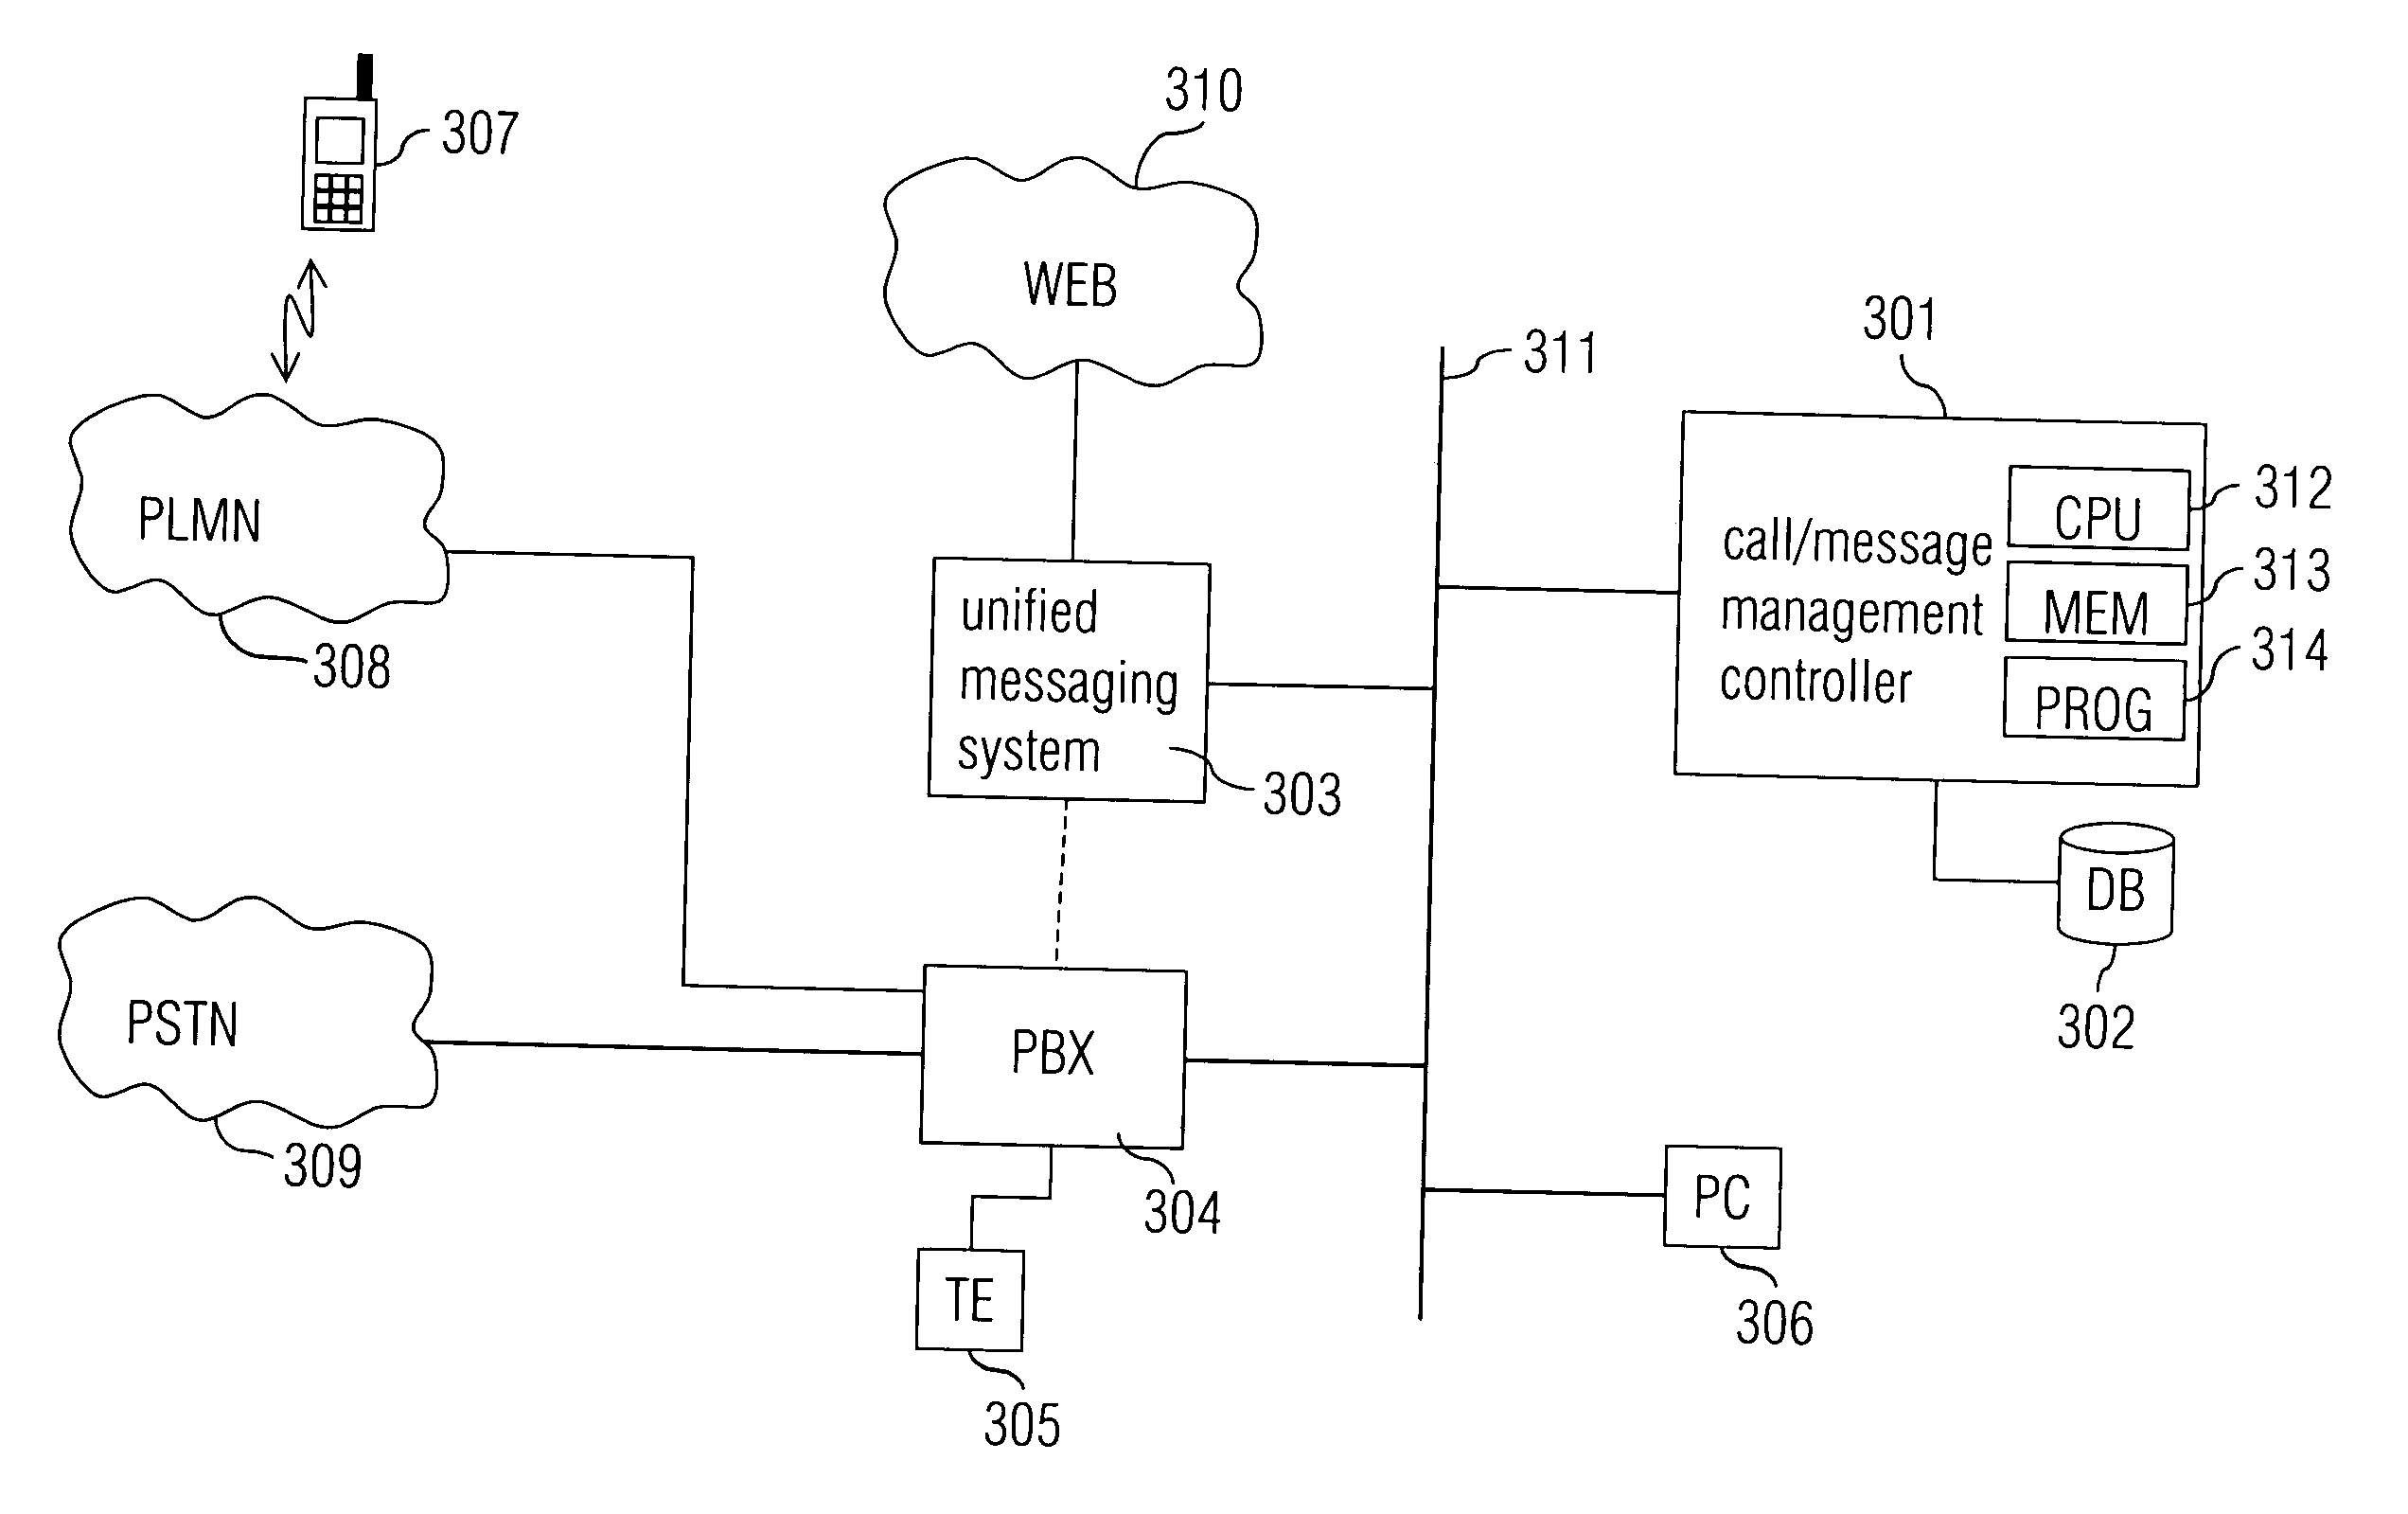 Managing incoming calls and/or messages in a communications system